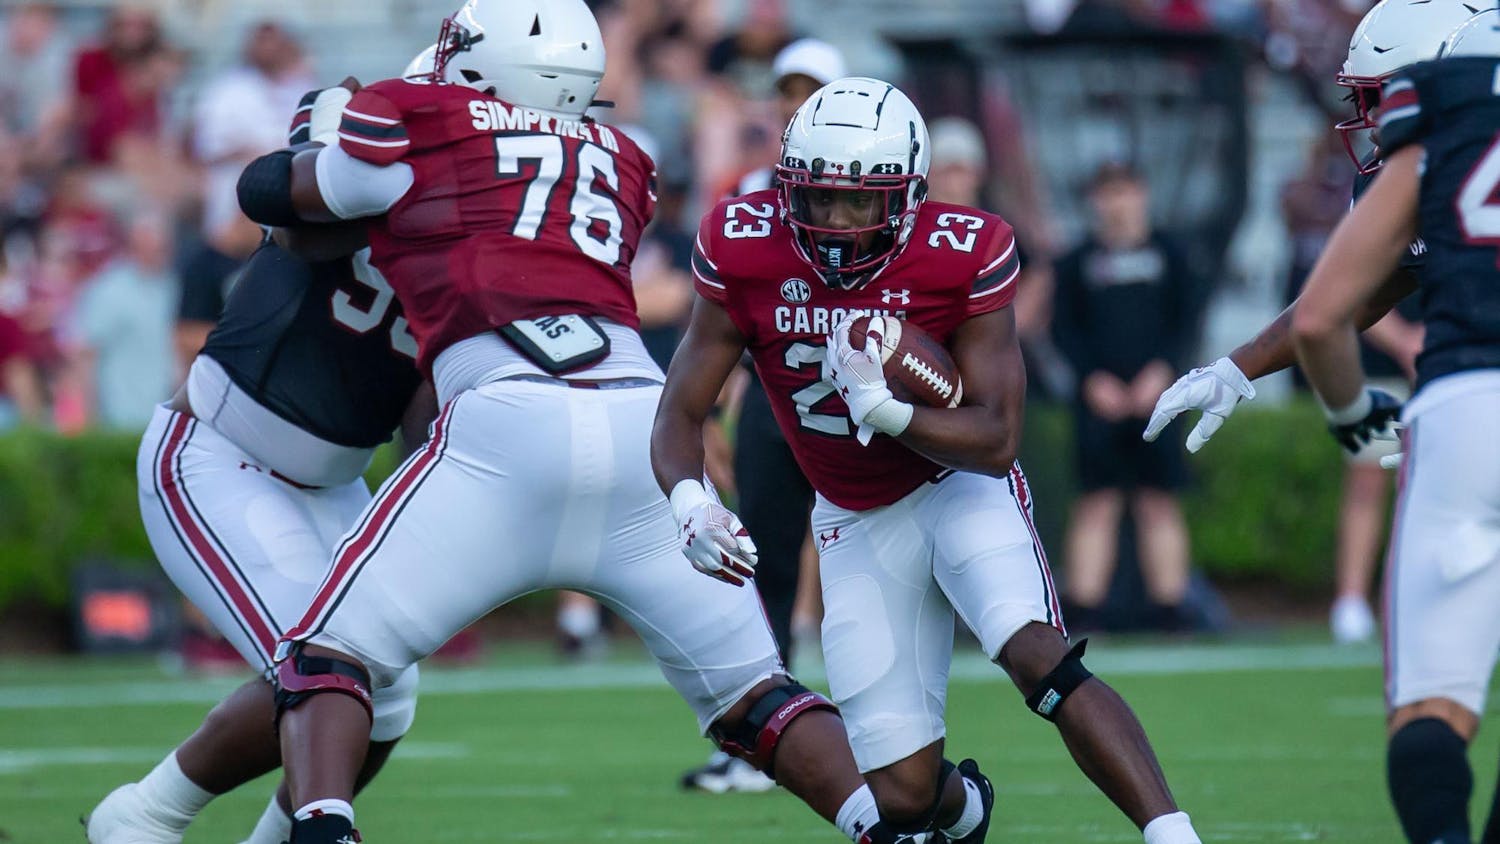 Sophomore running back Djay Braswell carries the ball during the 2024 Garnet &amp; Black Spring Game at Williams-Brice Stadium on April 20, 2024. Braswell rushed for 26 yards in the Garnet team's 17-0 victory over the Black team.